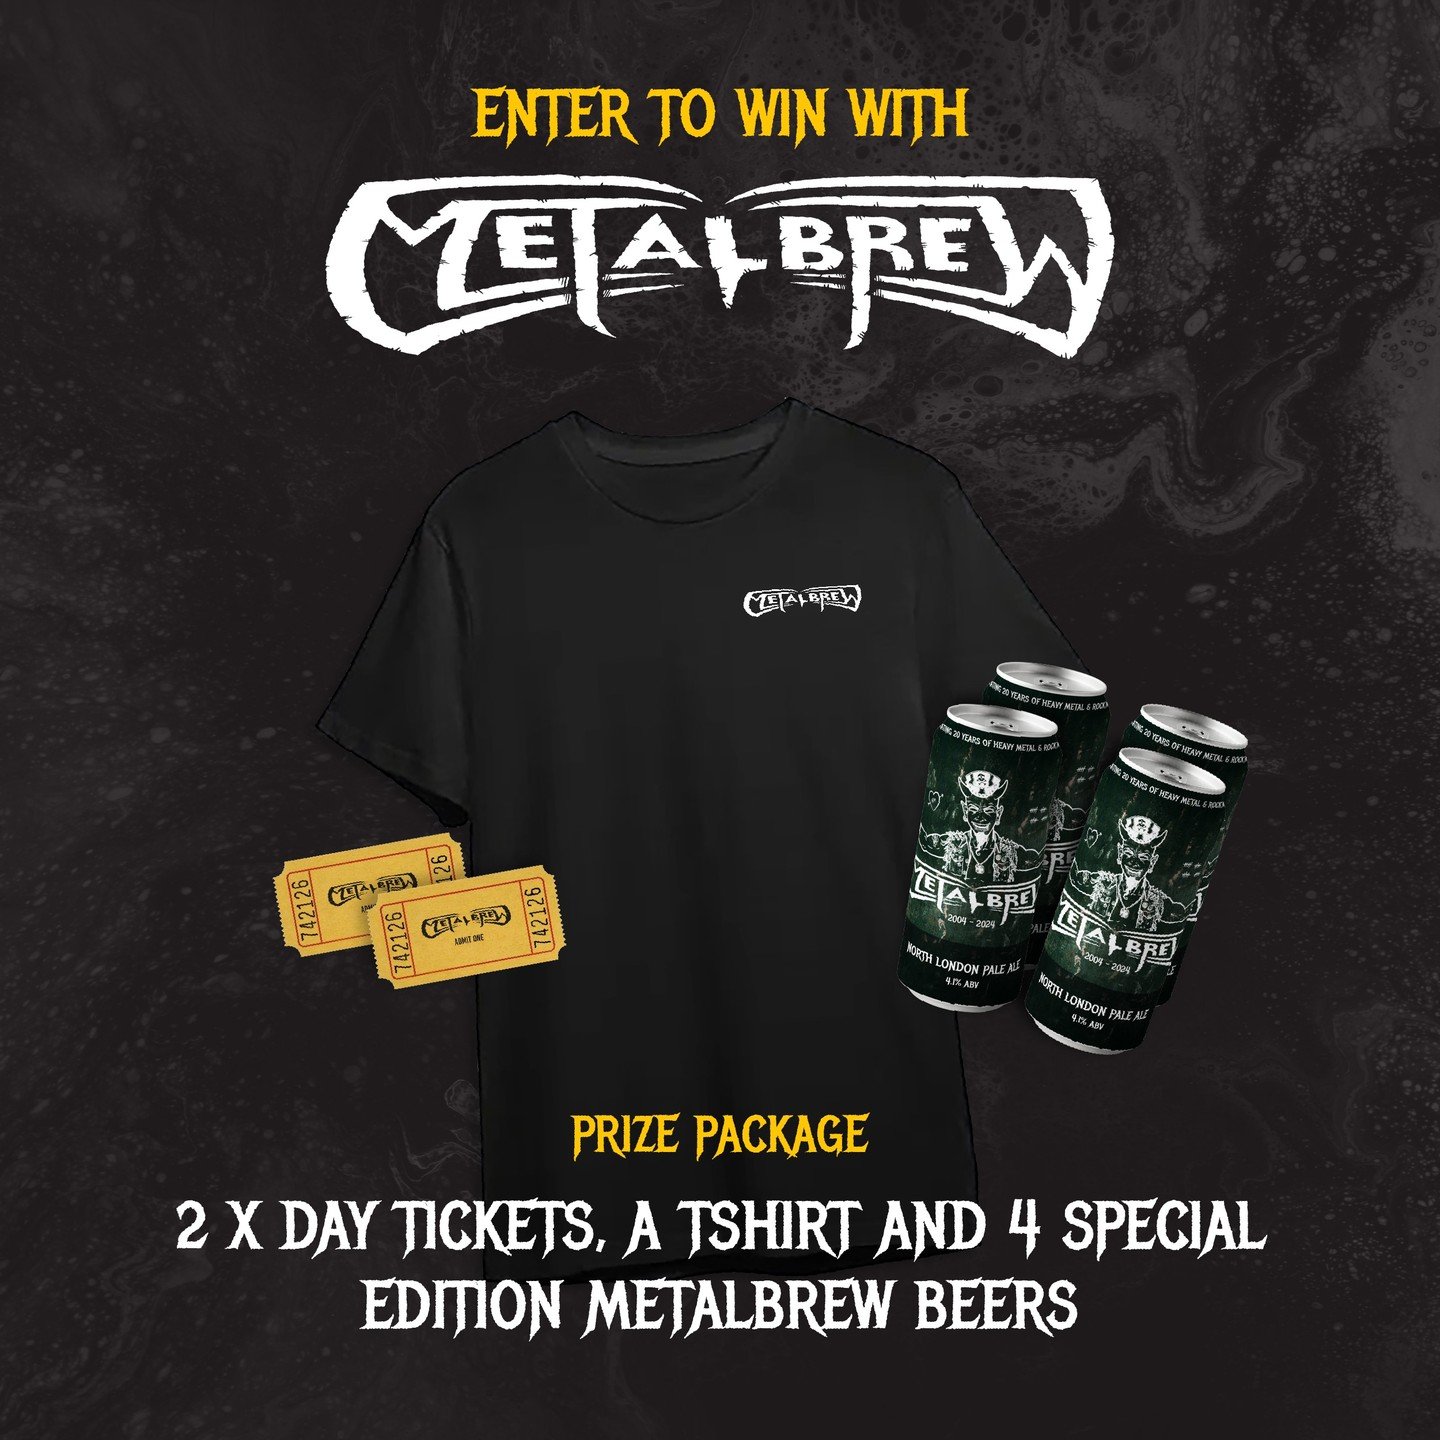 PRIZES YOU SAY? WHAT A TIME TO BE ALIVE! 🖤

We're doing one of those giveaways. You know, the one everyone hates! All you need to do is follow us and share our post to be in with a chance to win. You'll get two free tickets to Metalbrew, a T-shirt a